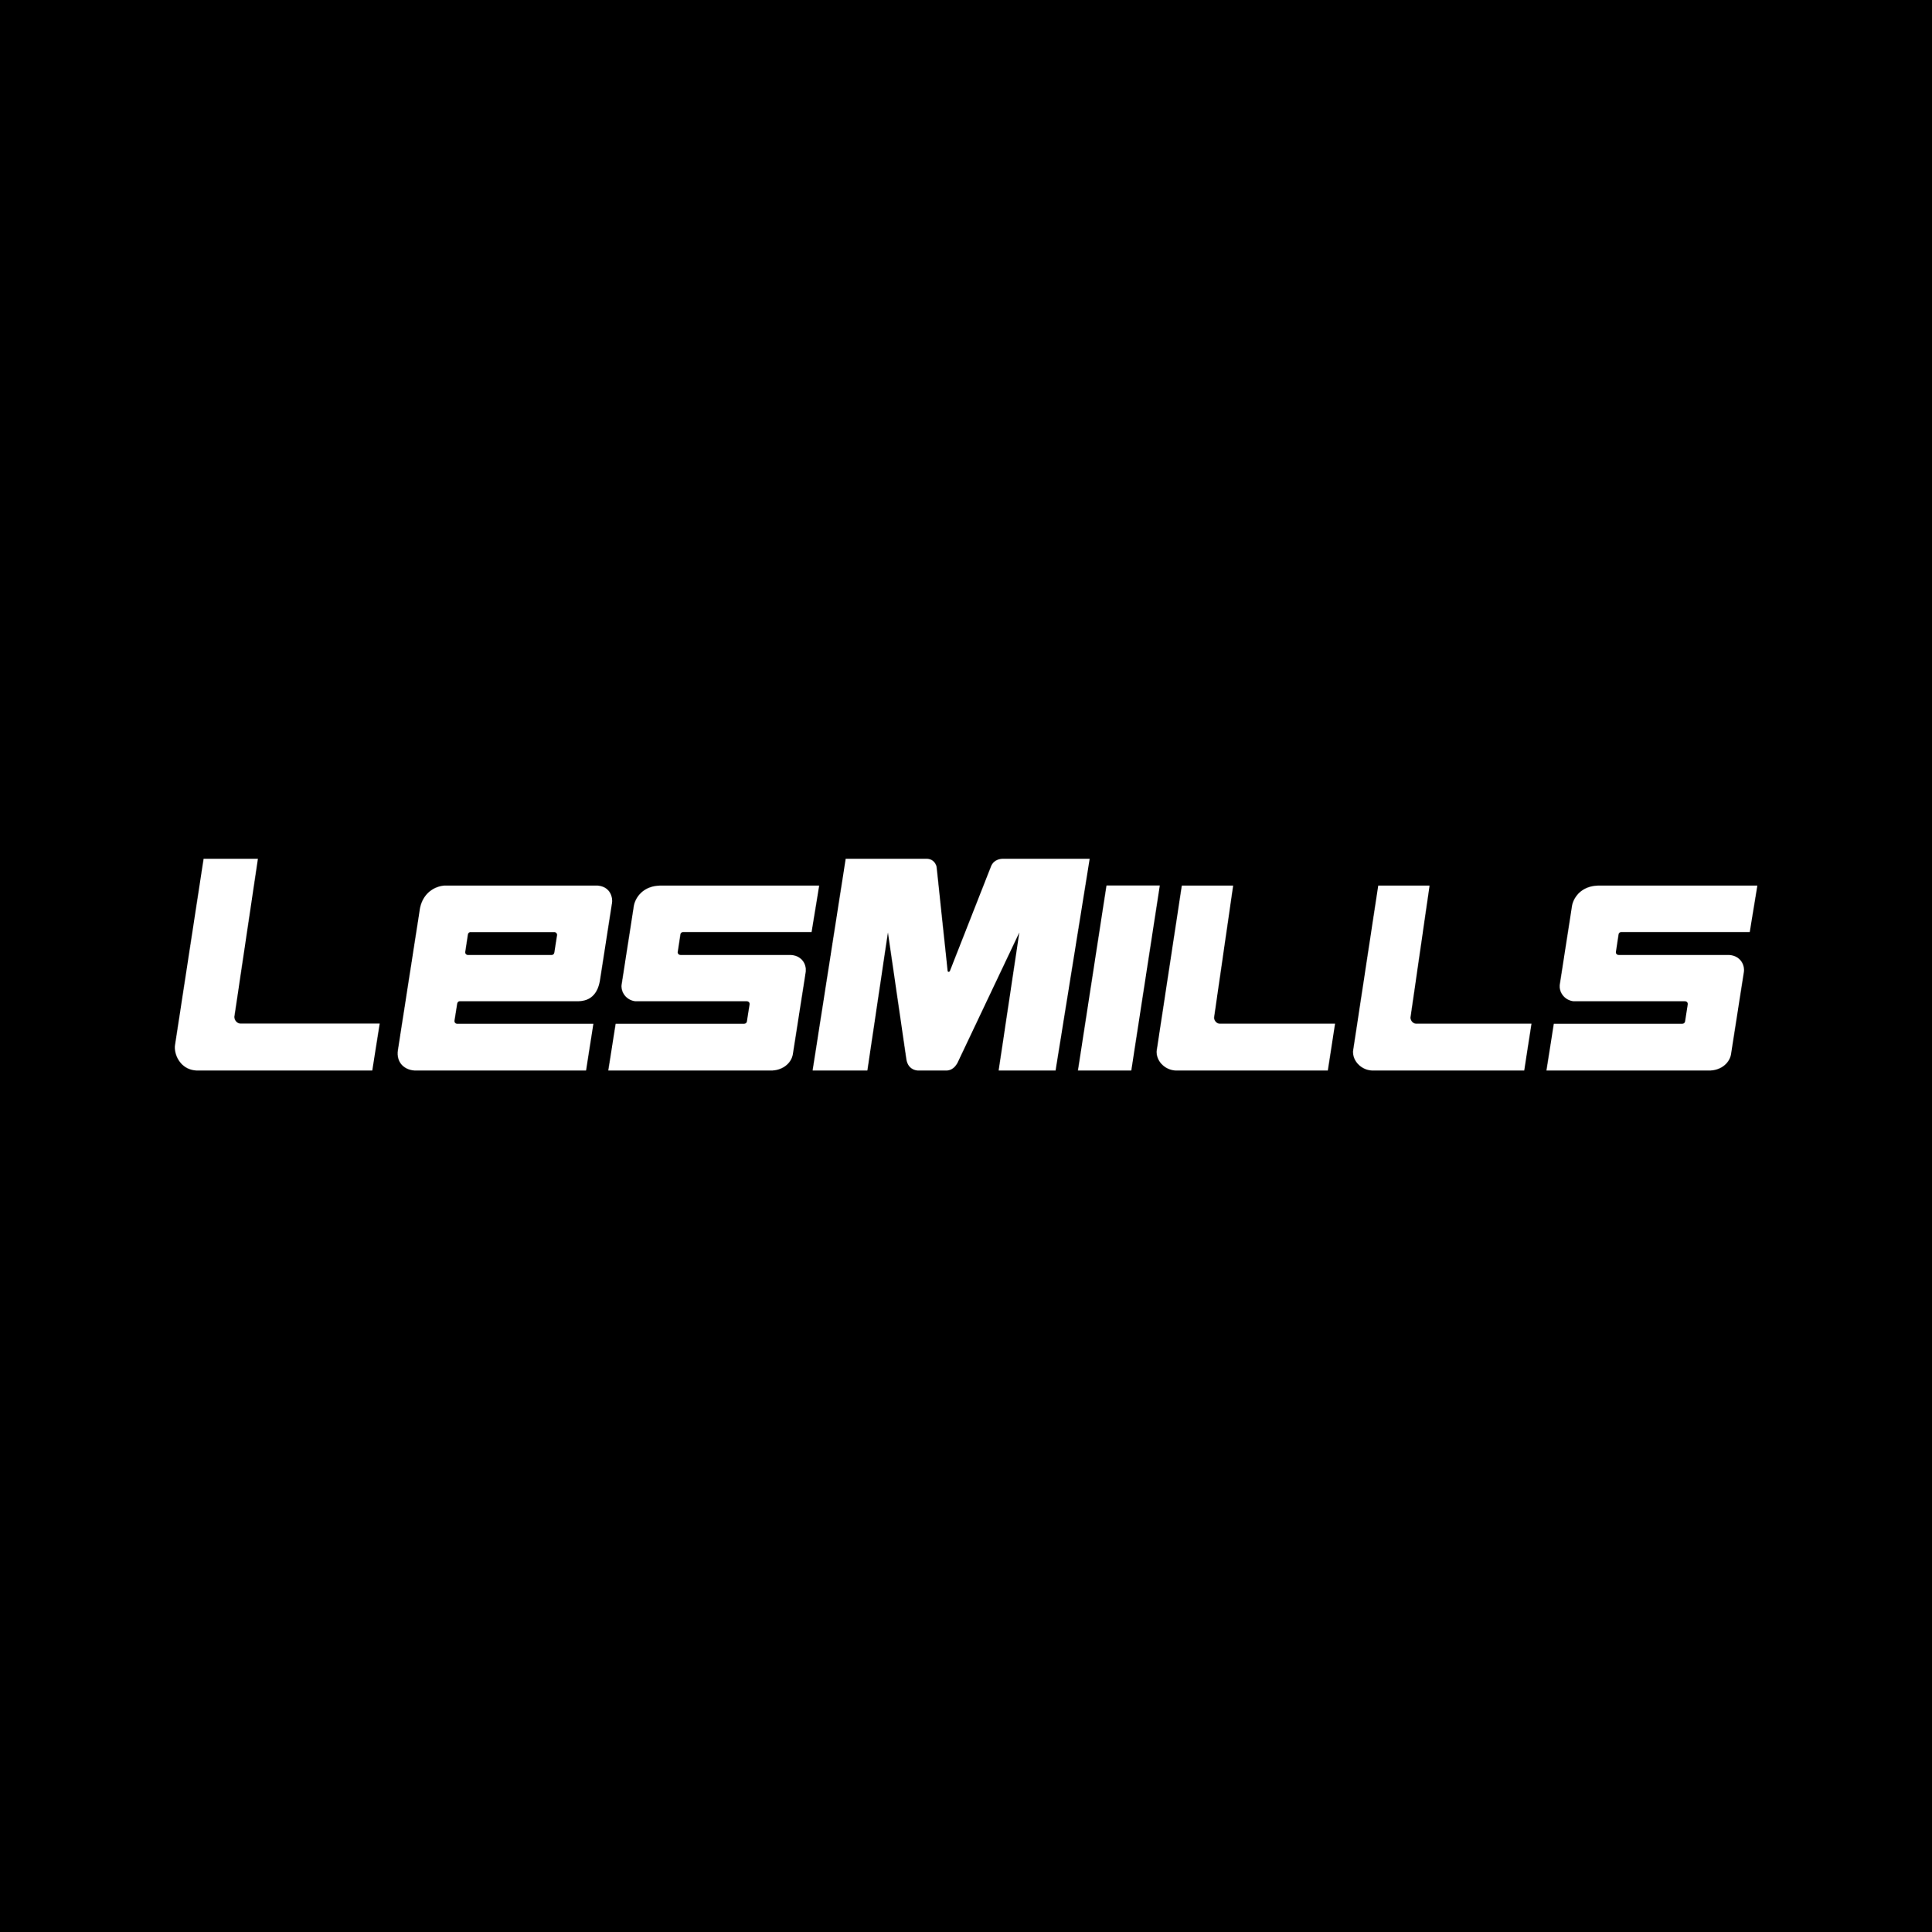 Les Mills Coupons & Promo Codes